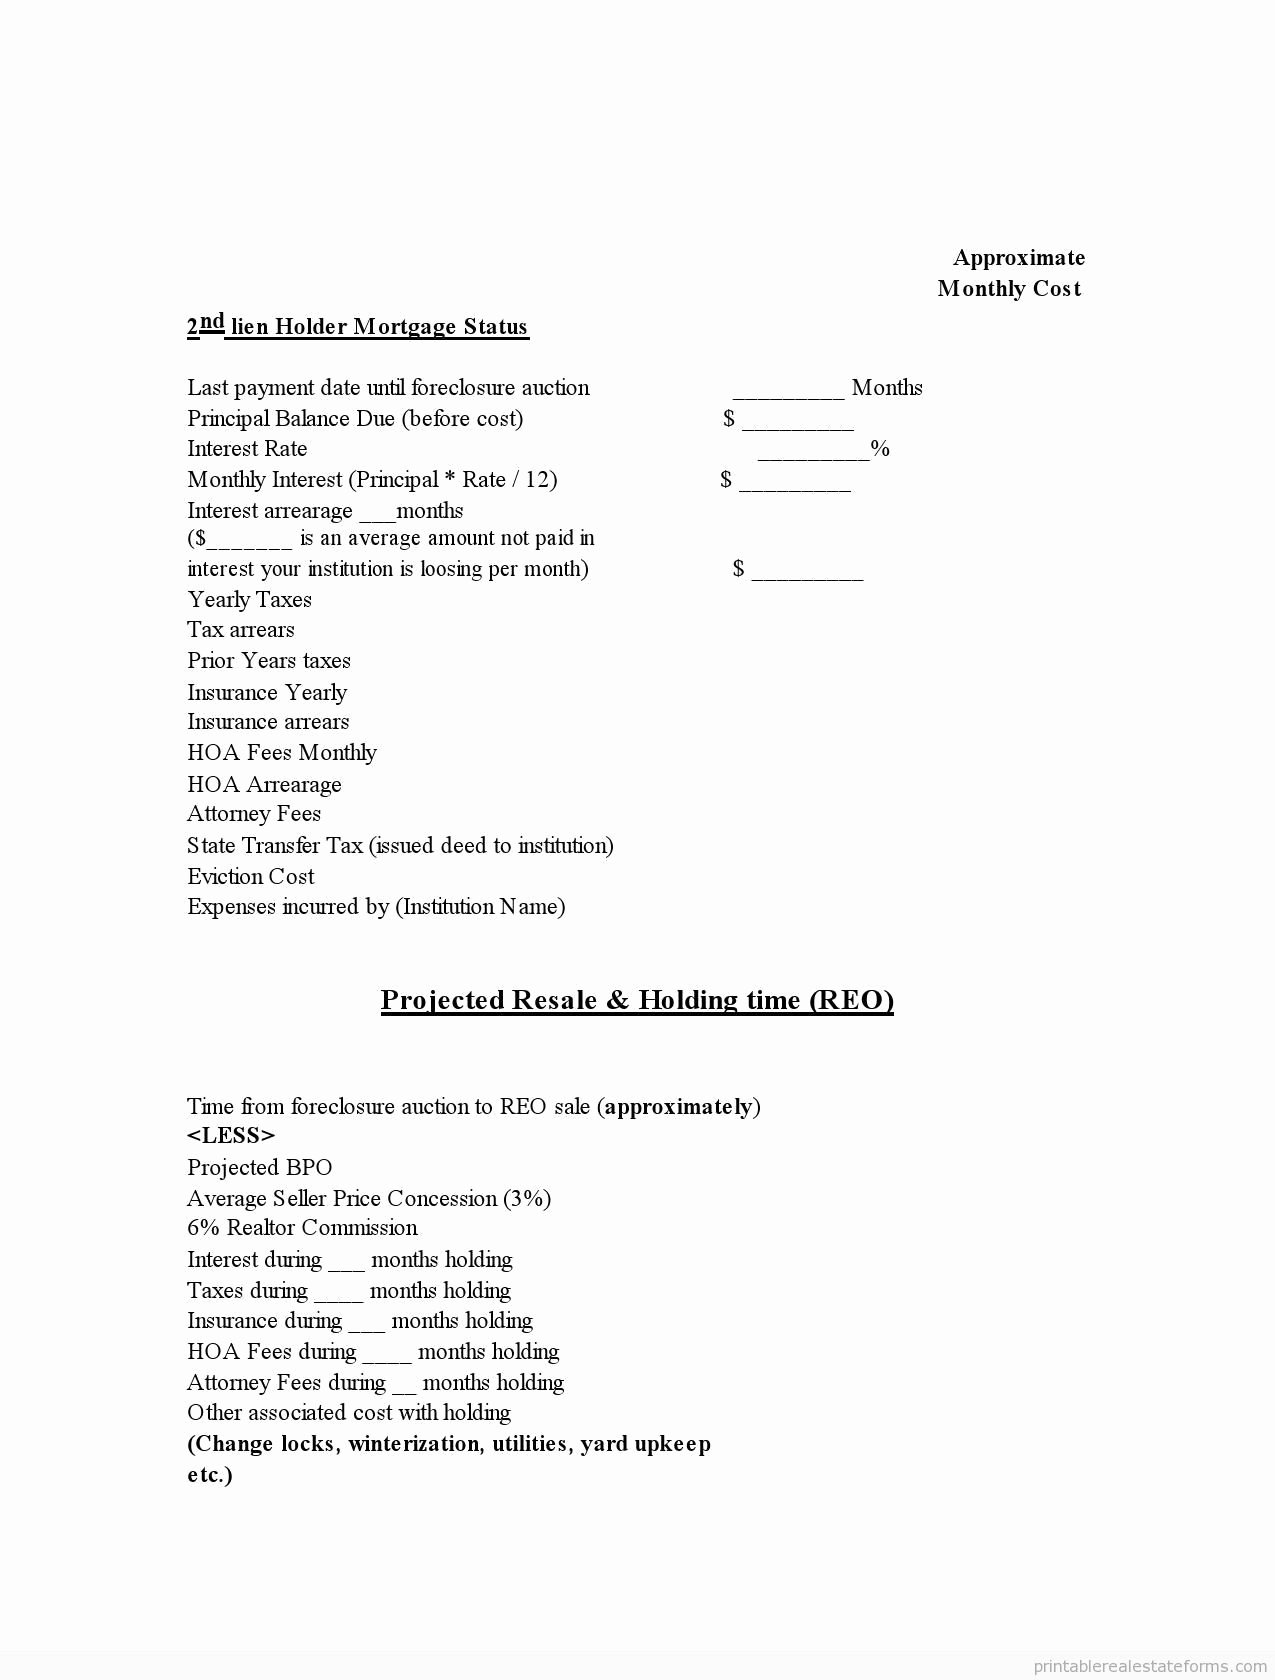 Foreclosure Letter Templates Inspirational Printable Copy Of Projected foreclosure to Reo Cost